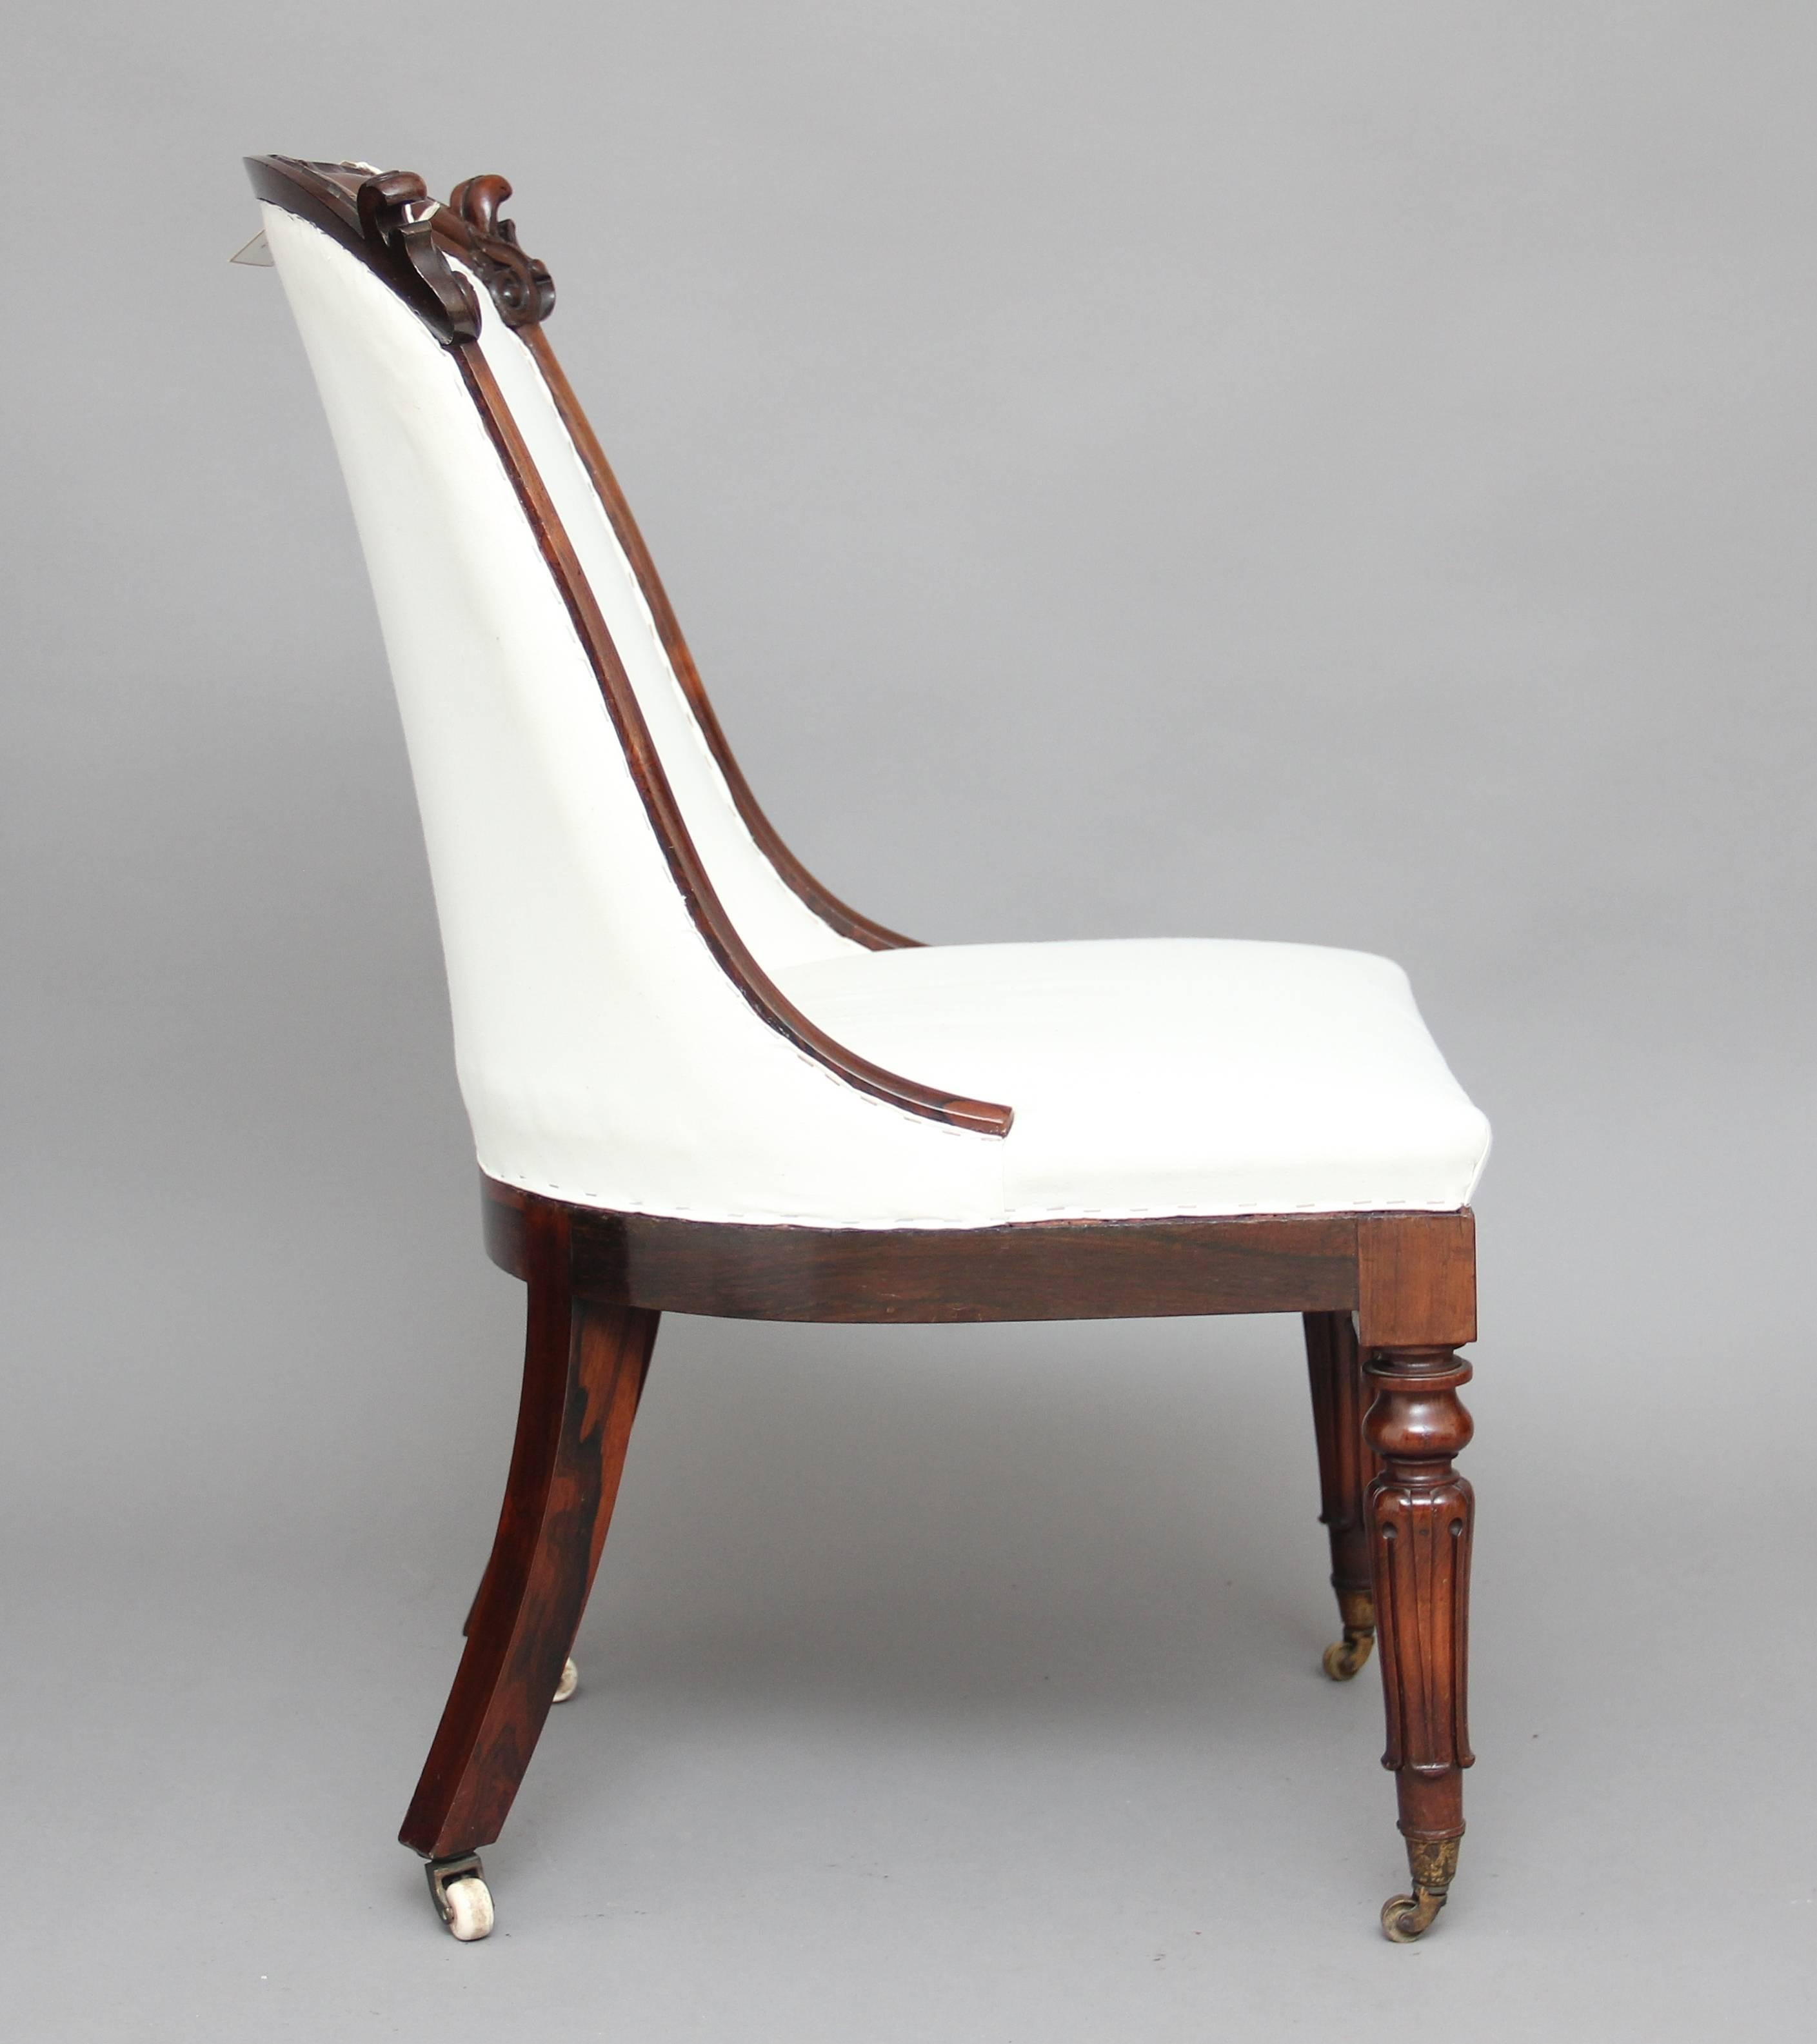 19th century rosewood slipper chair upholstered in a neutral calico, the shaped back having lovely carved detail, the low seat supported on swept back legs and turned and fluted front legs with brass caps and castors. circa 1840.
  